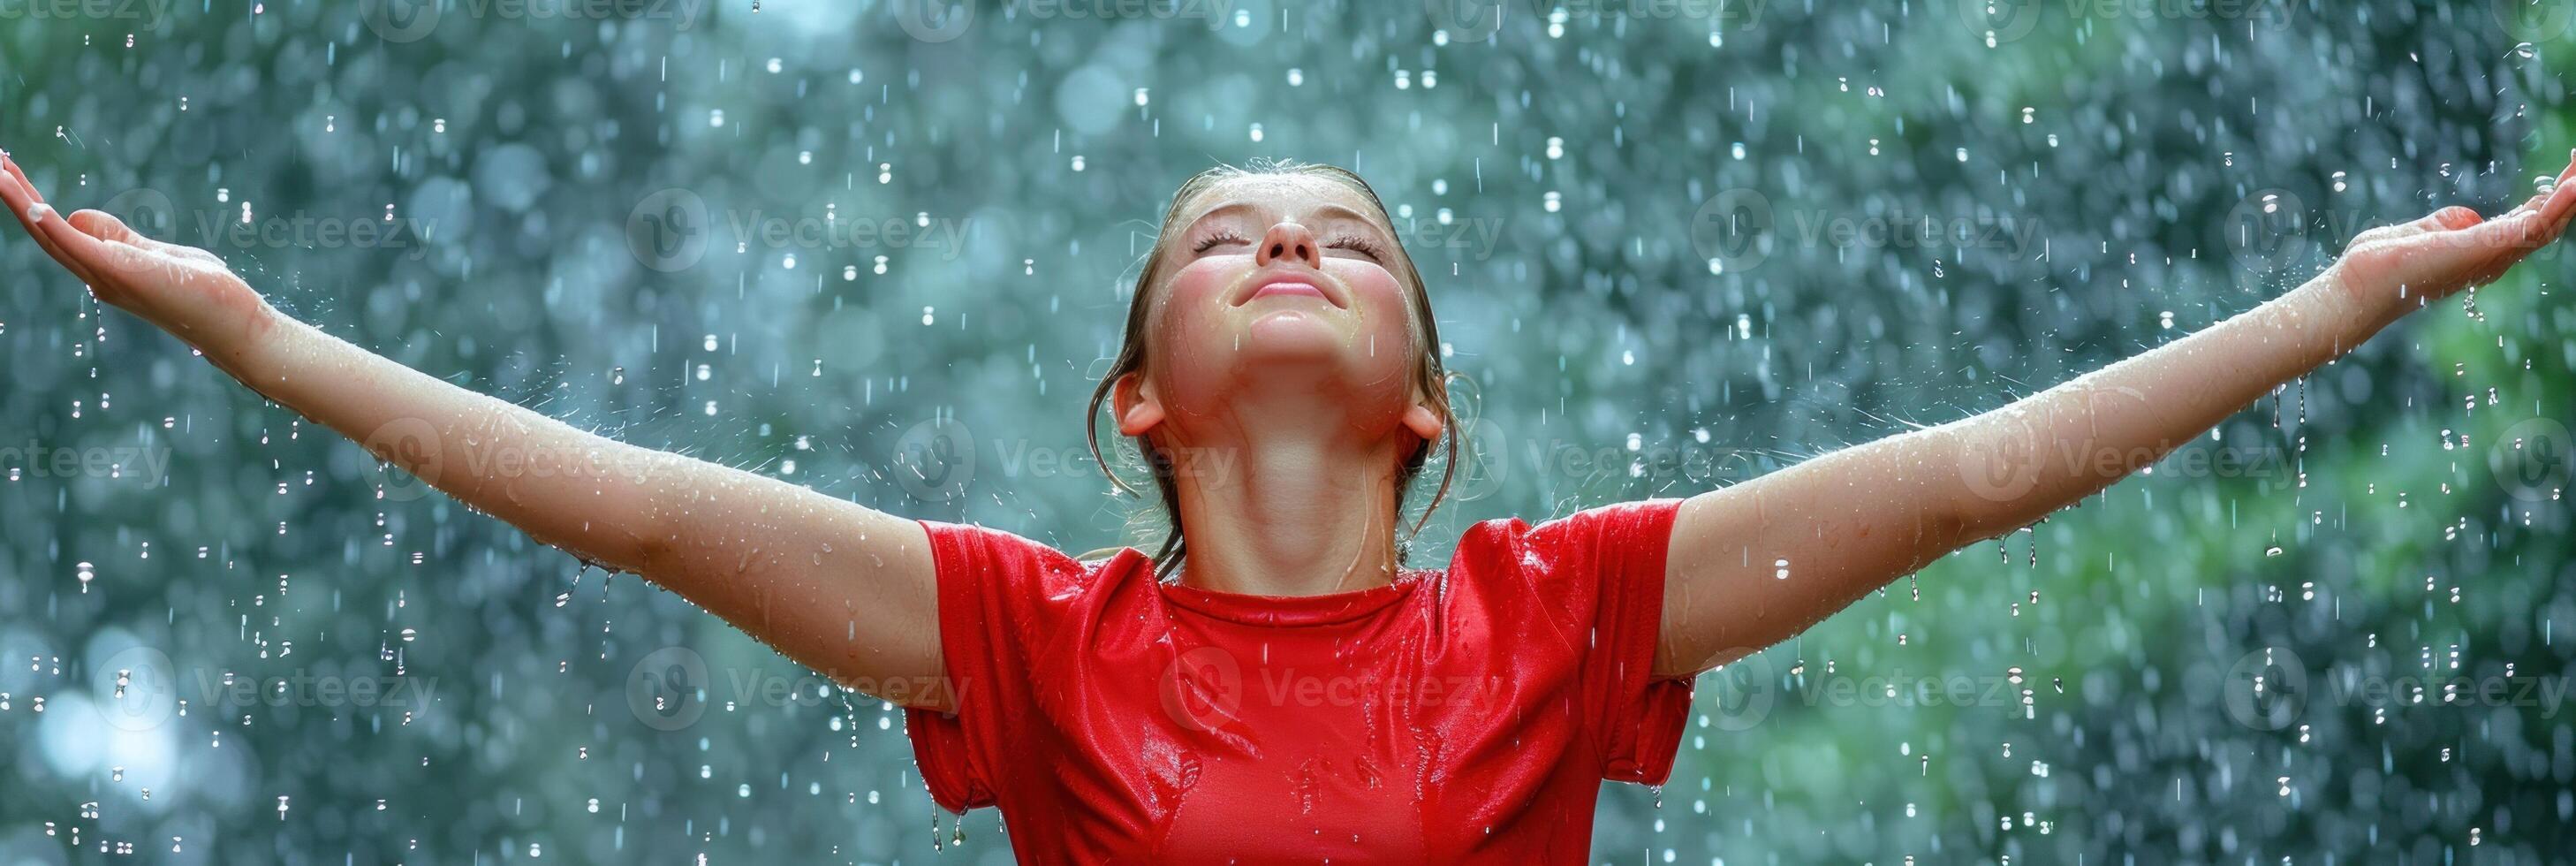 A woman stands in the rain with her arms extended outwards photo